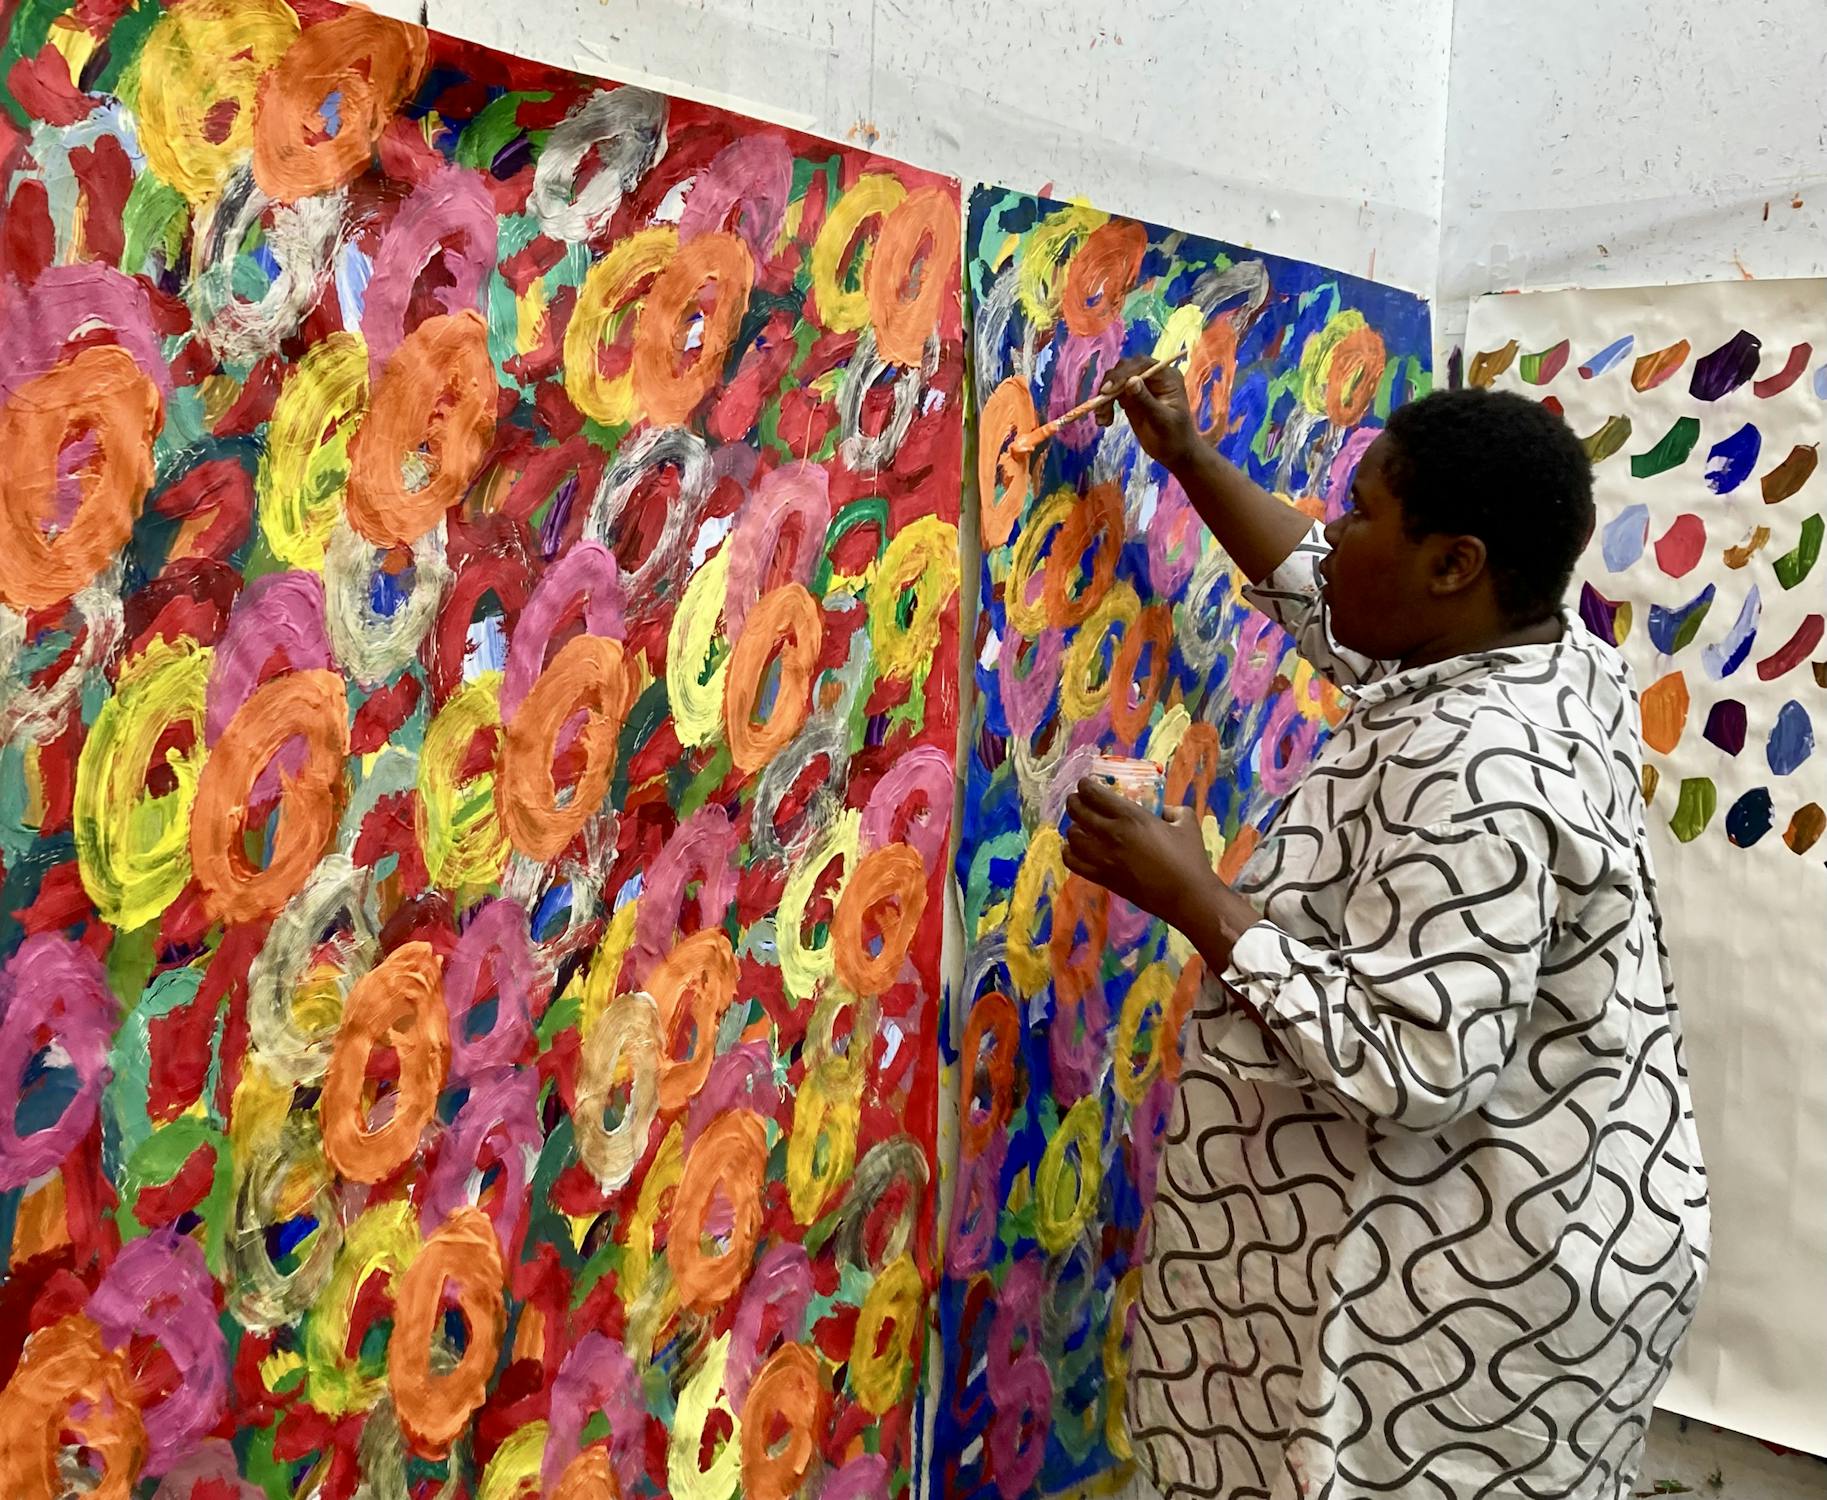 Kwaga Sillingi. Painting in the ActionSpace studio. 2022. Image courtesy of the Artist and ActionSpace